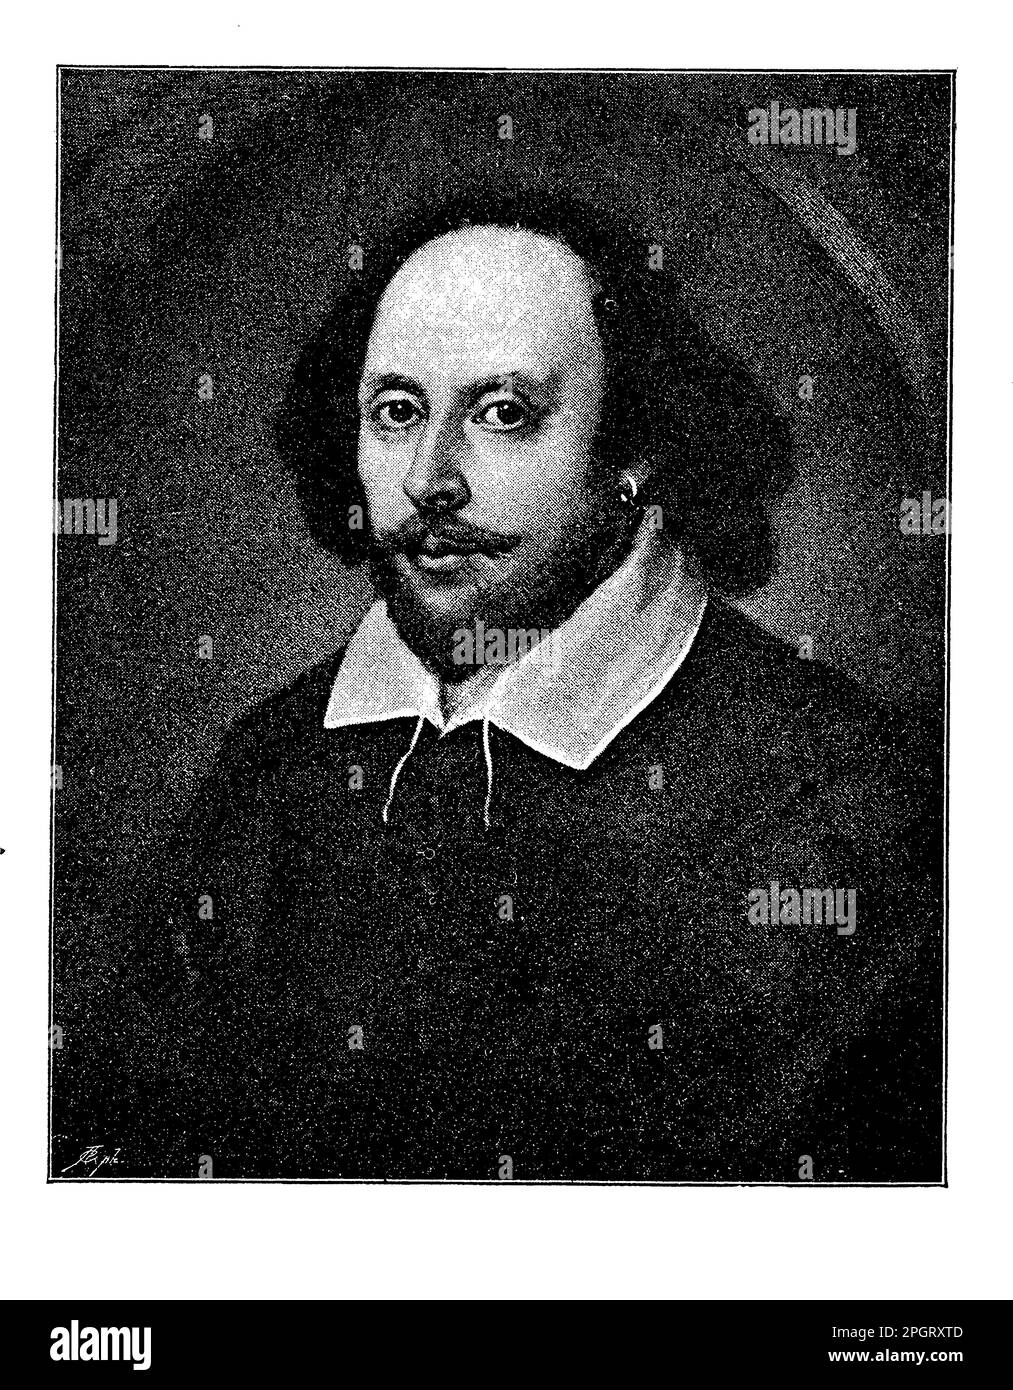 William Shakespeare was an English playwright and poet who is widely considered one of the greatest writers in the English language. He lived from 1564-1616 and wrote dozens of plays, including classics like Hamlet, Romeo and Juliet, and Macbeth Stock Photo